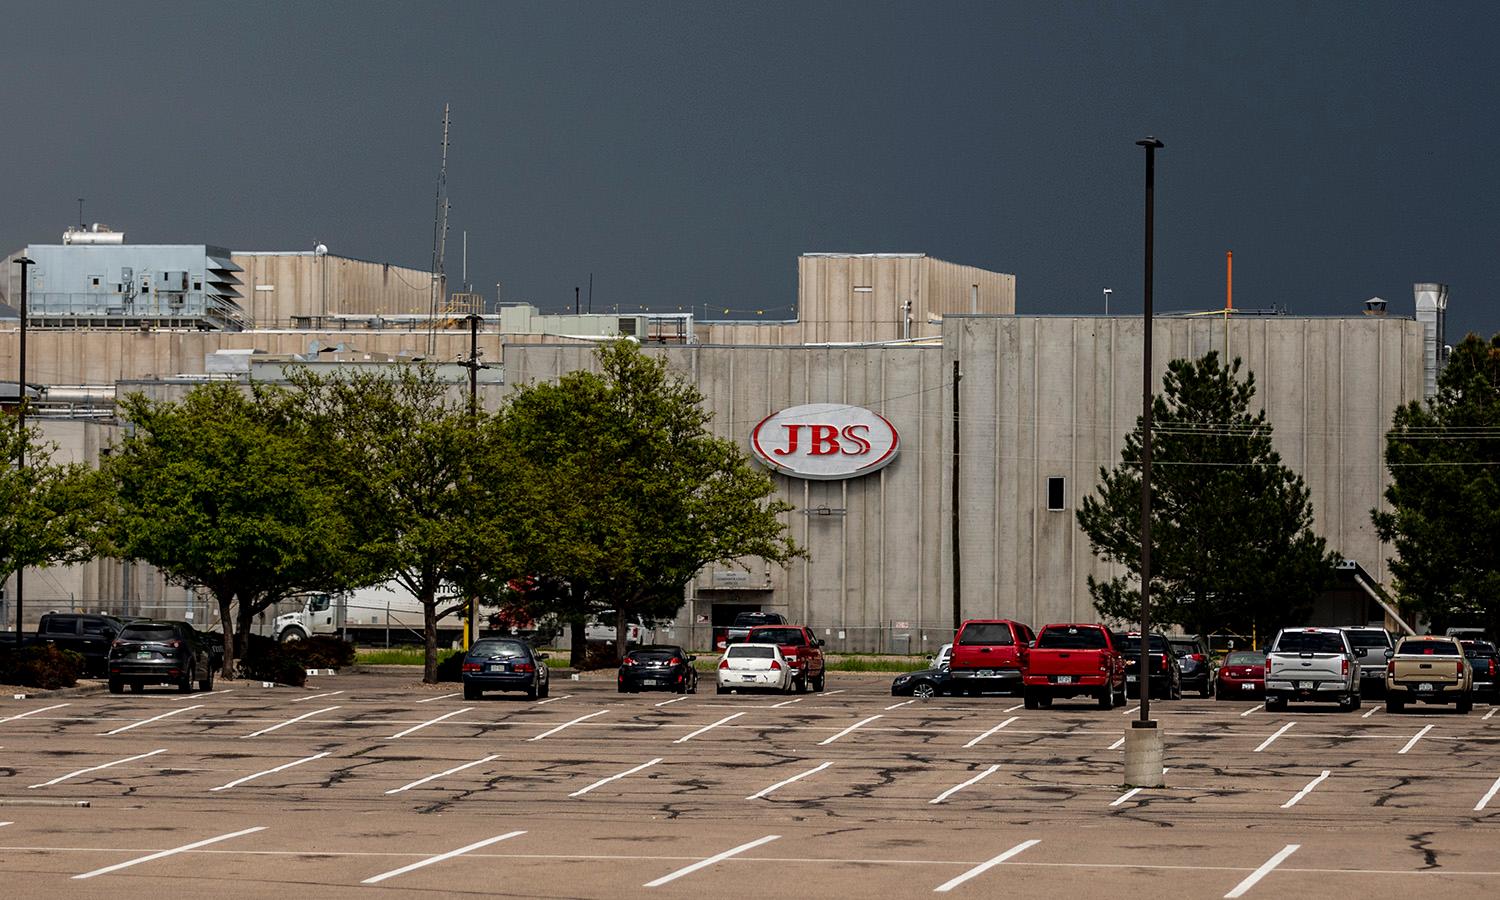 A JBS processing plant stands dormant after halting operations on June 1, 2021, in Greeley, Colo. JBS facilities around the globe were impacted by a ransomware attack, forcing many of their facilities to shut down. (Photo by Chet Strange/Getty Images)